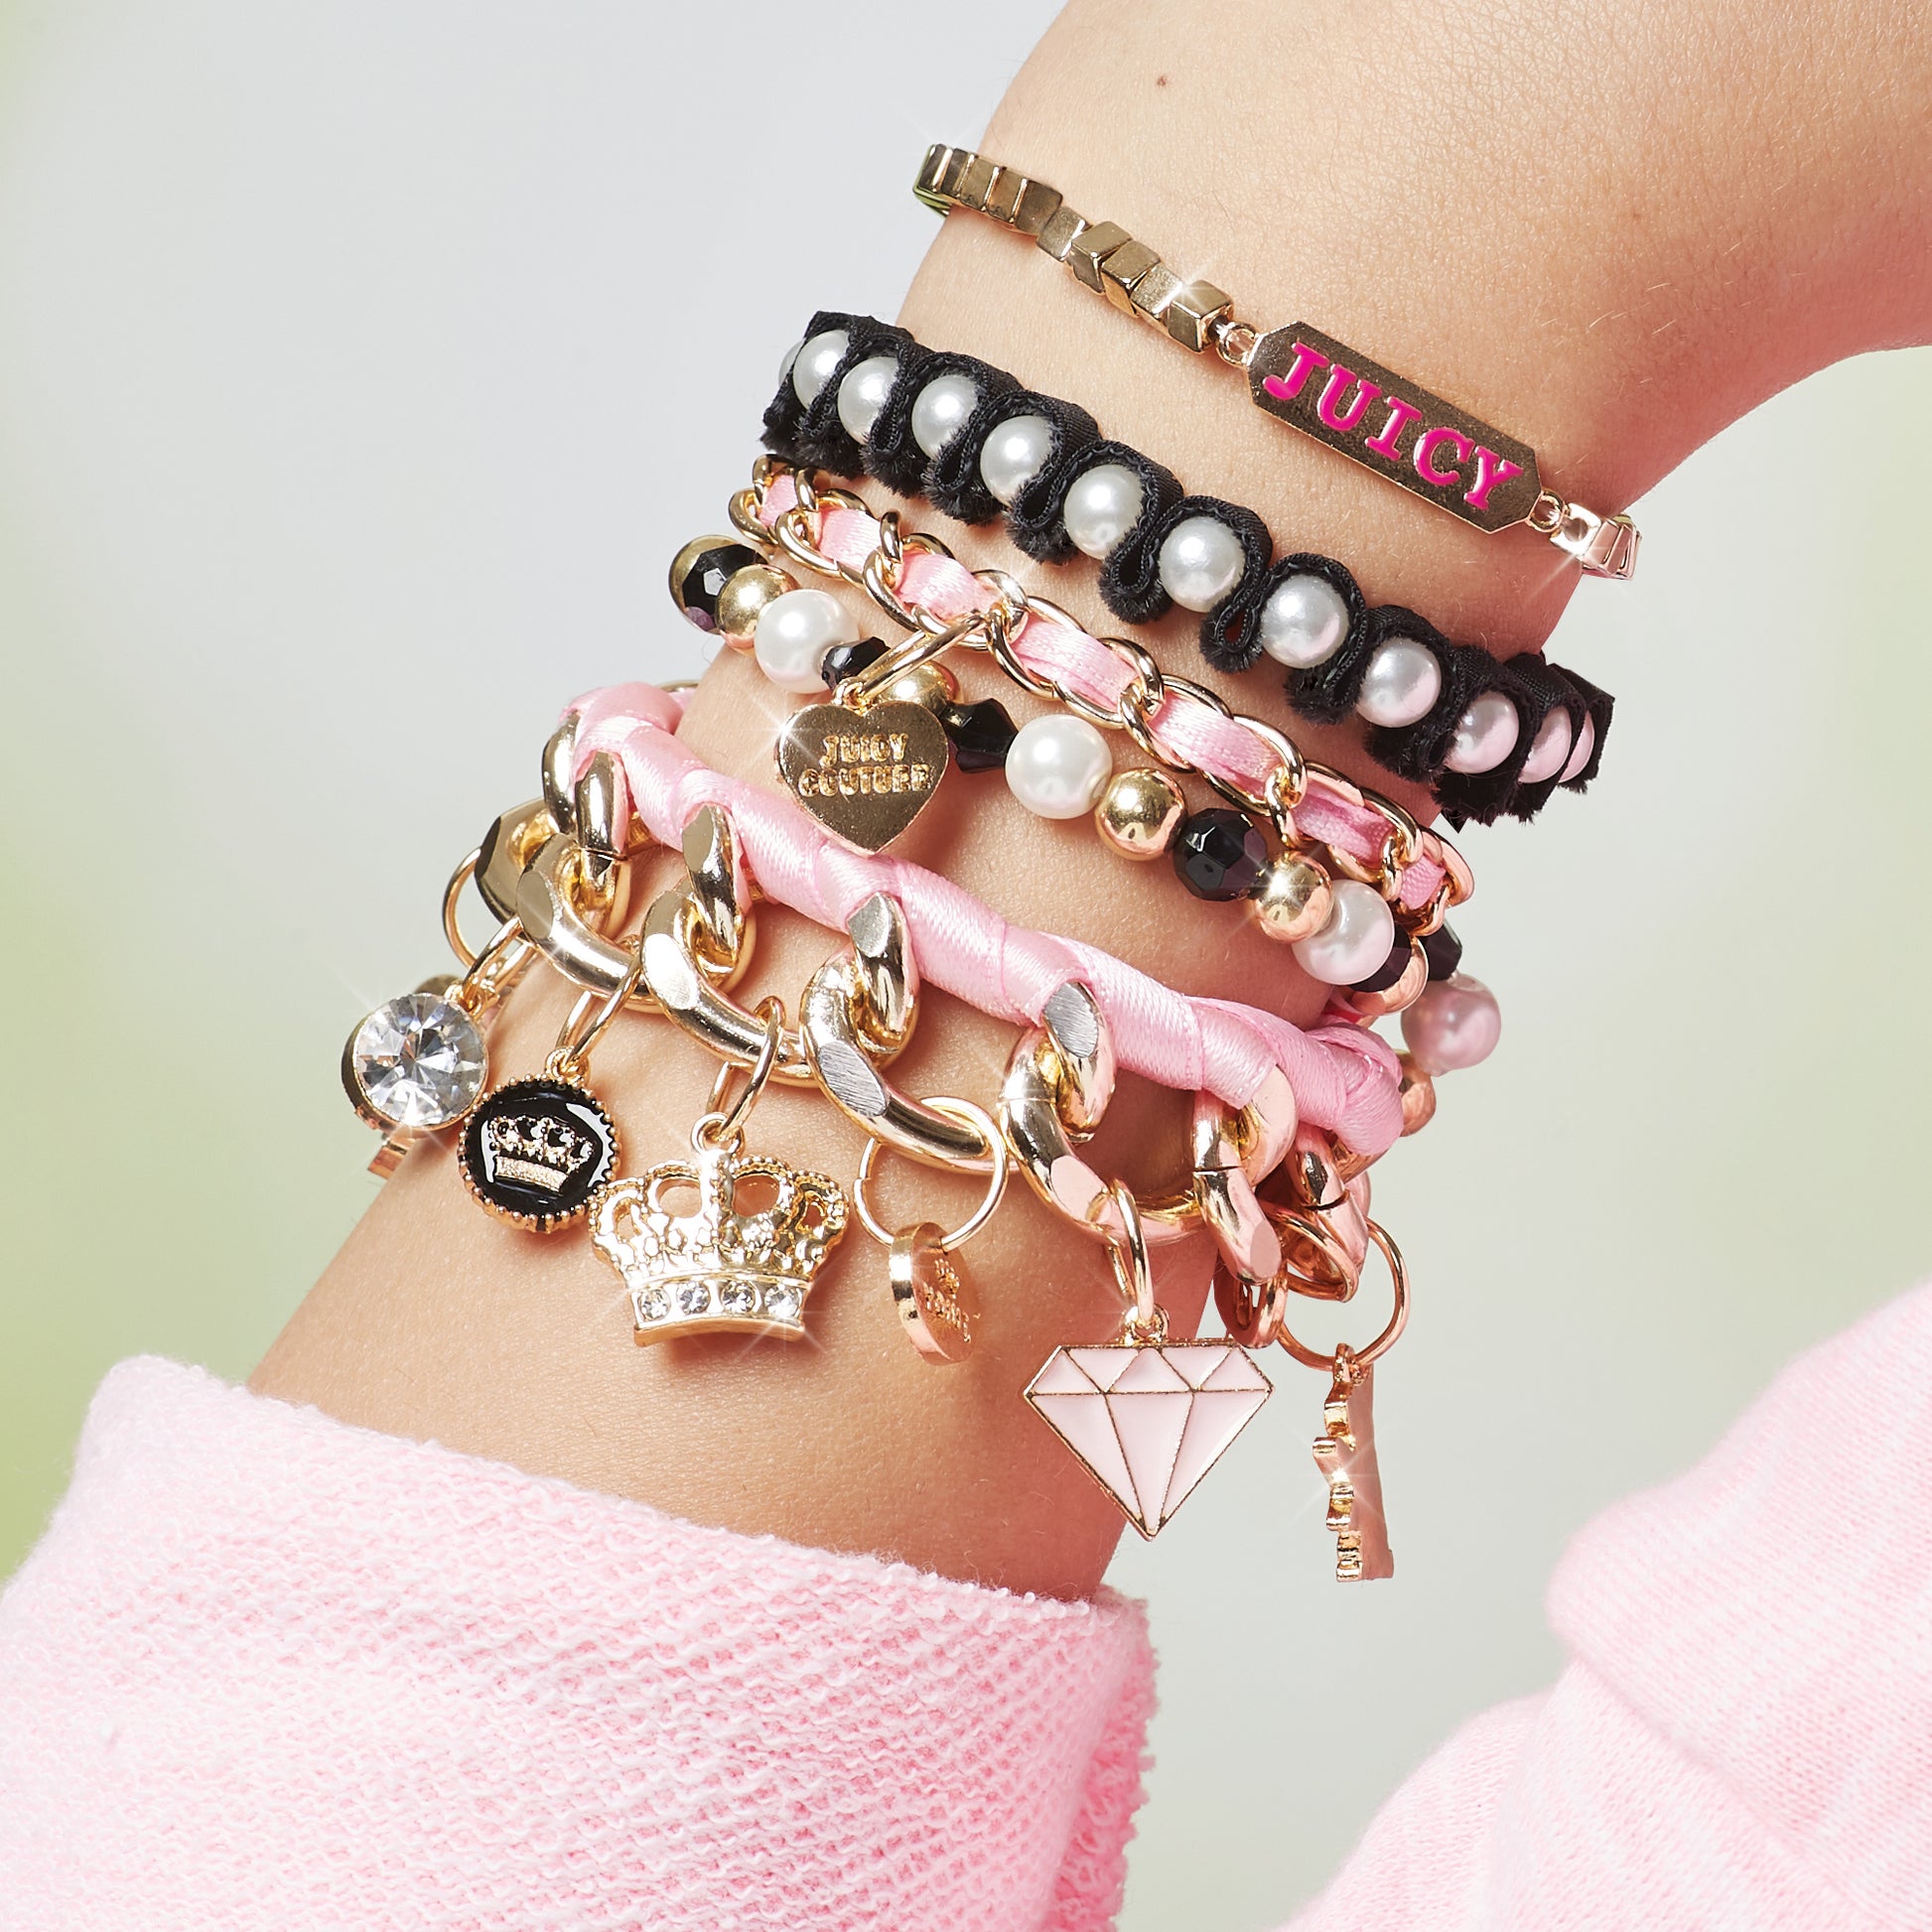 Make It Real – Juicy Couture Chains & Charms. DIY Charm Bracelet Making Kit  for Girls. Design and Create Girls Bracelets with Juicy Couture Charms,  Beads, Velvet Ribbon, Gold Chains and More 